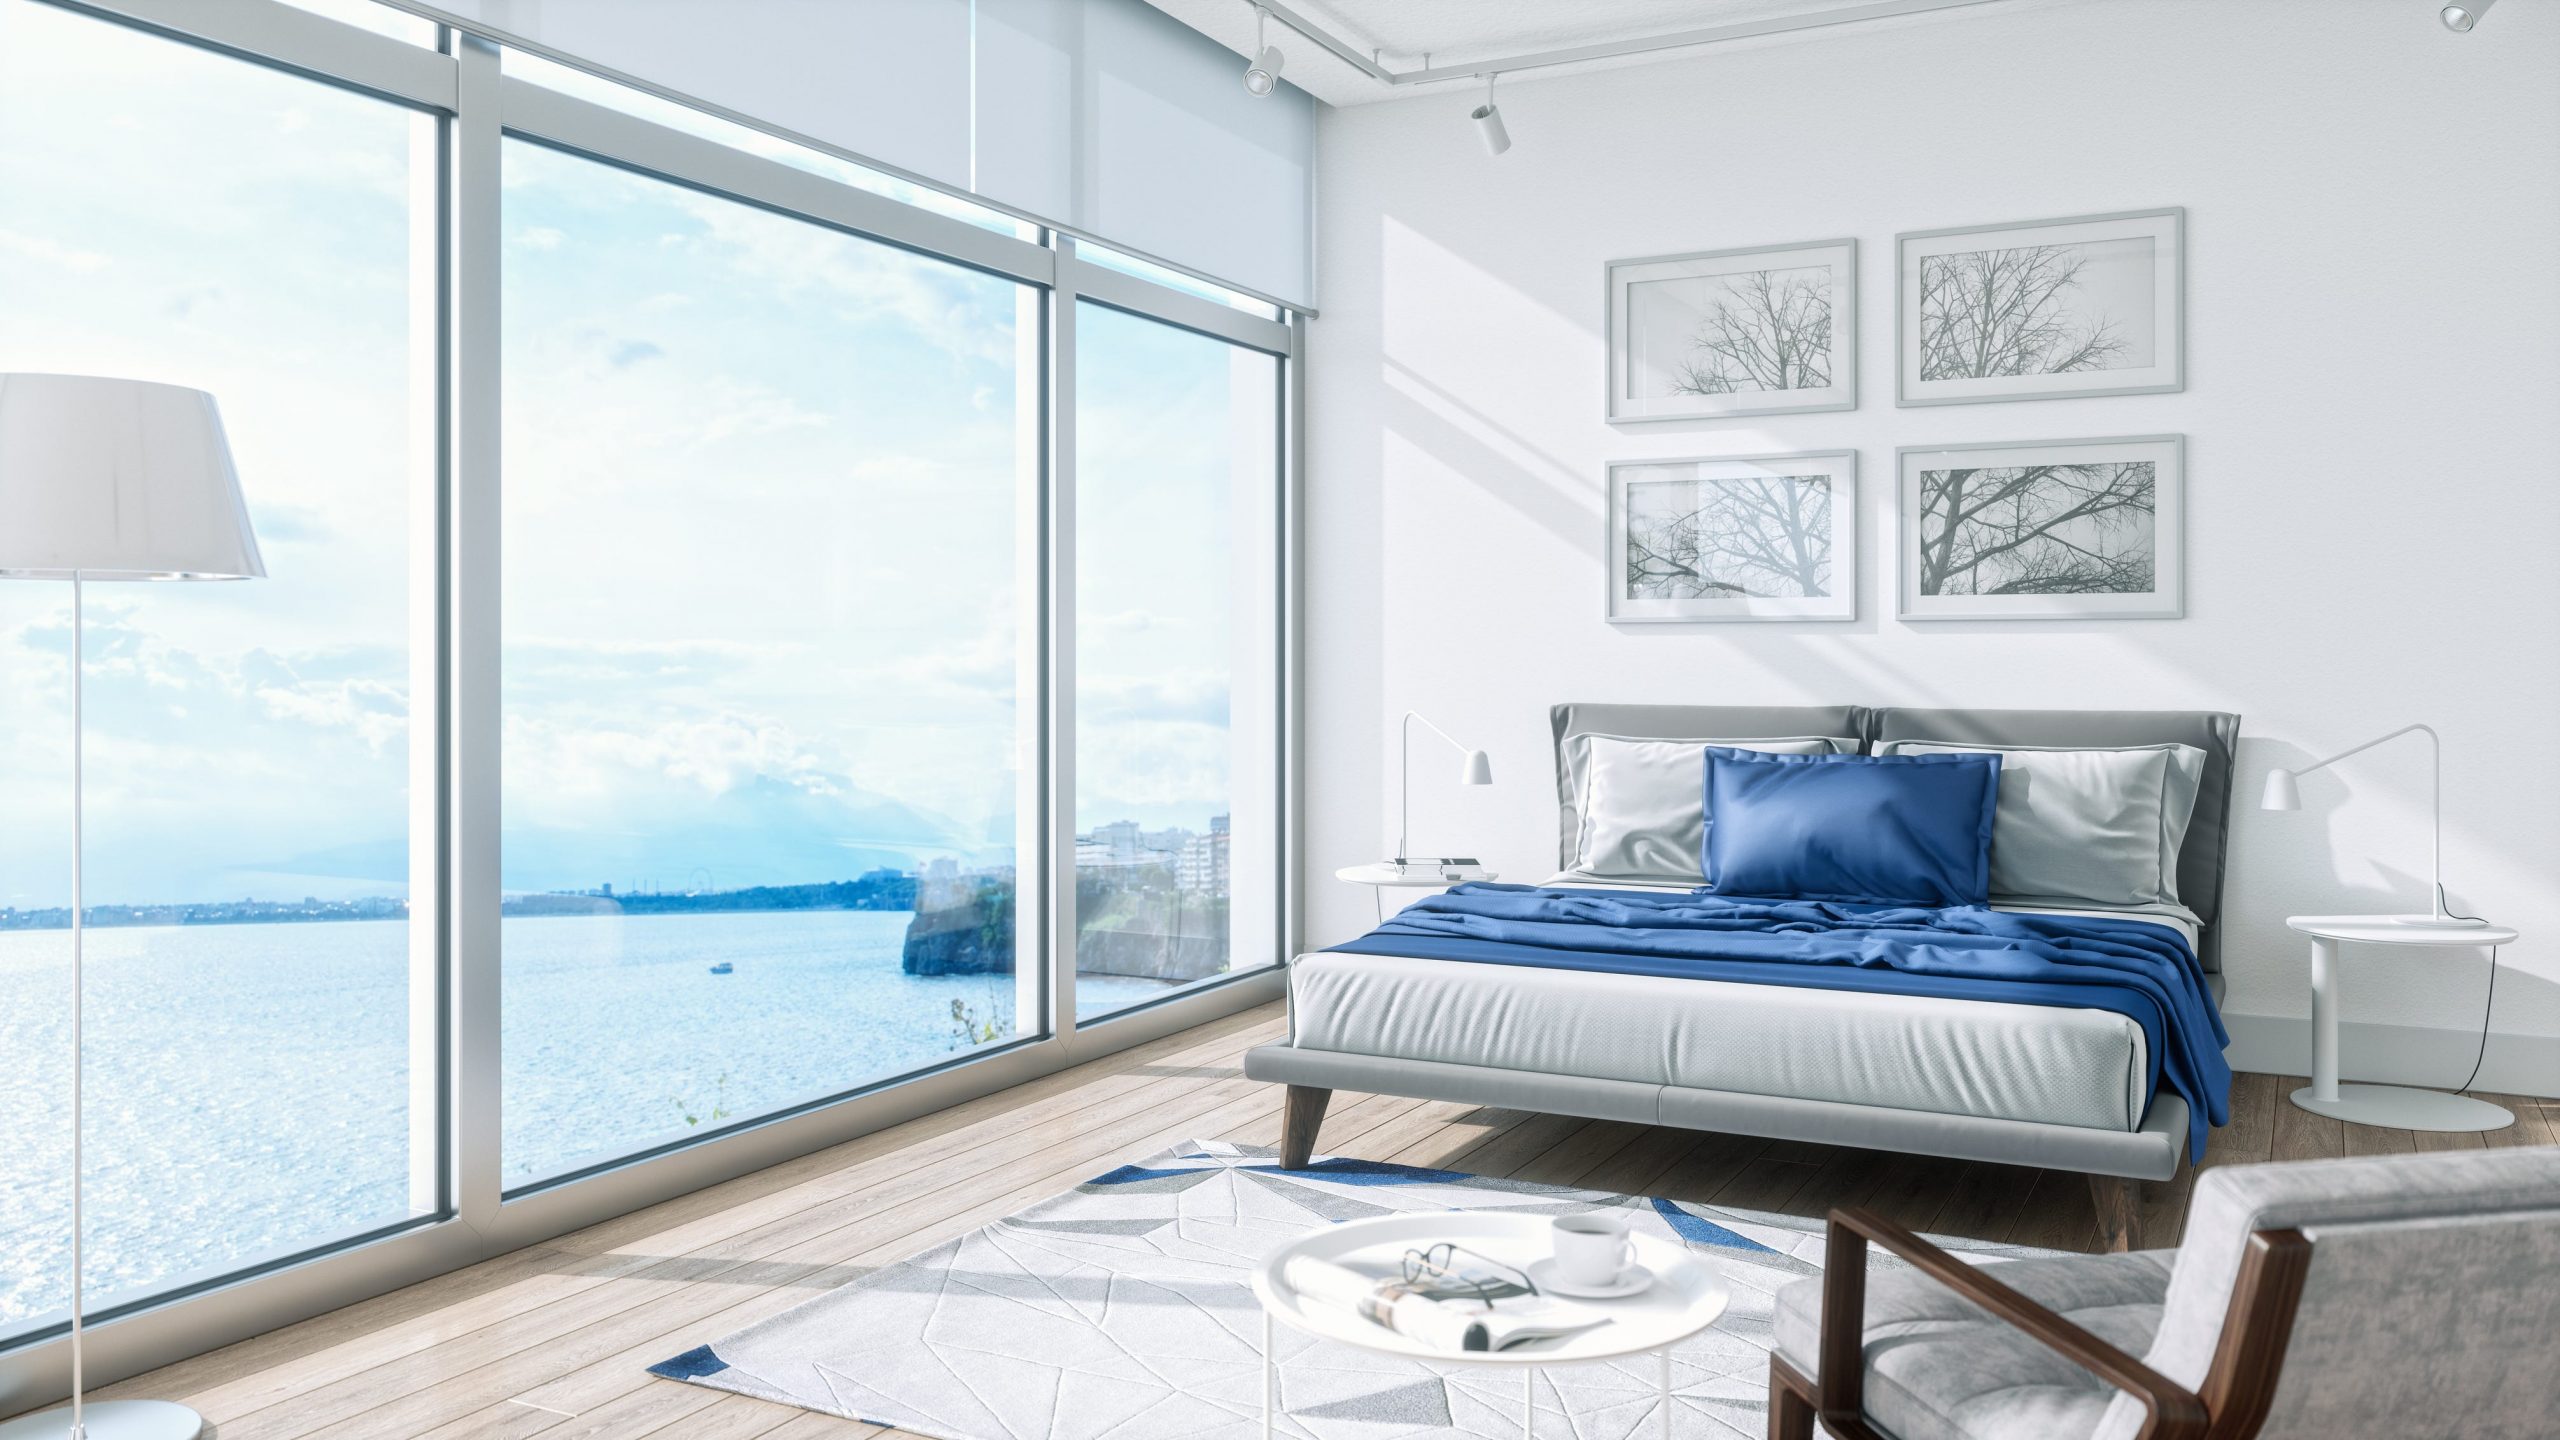 A bedroom with tall windows, a view of the ocean, and a bed dressed in gray and blue linen.